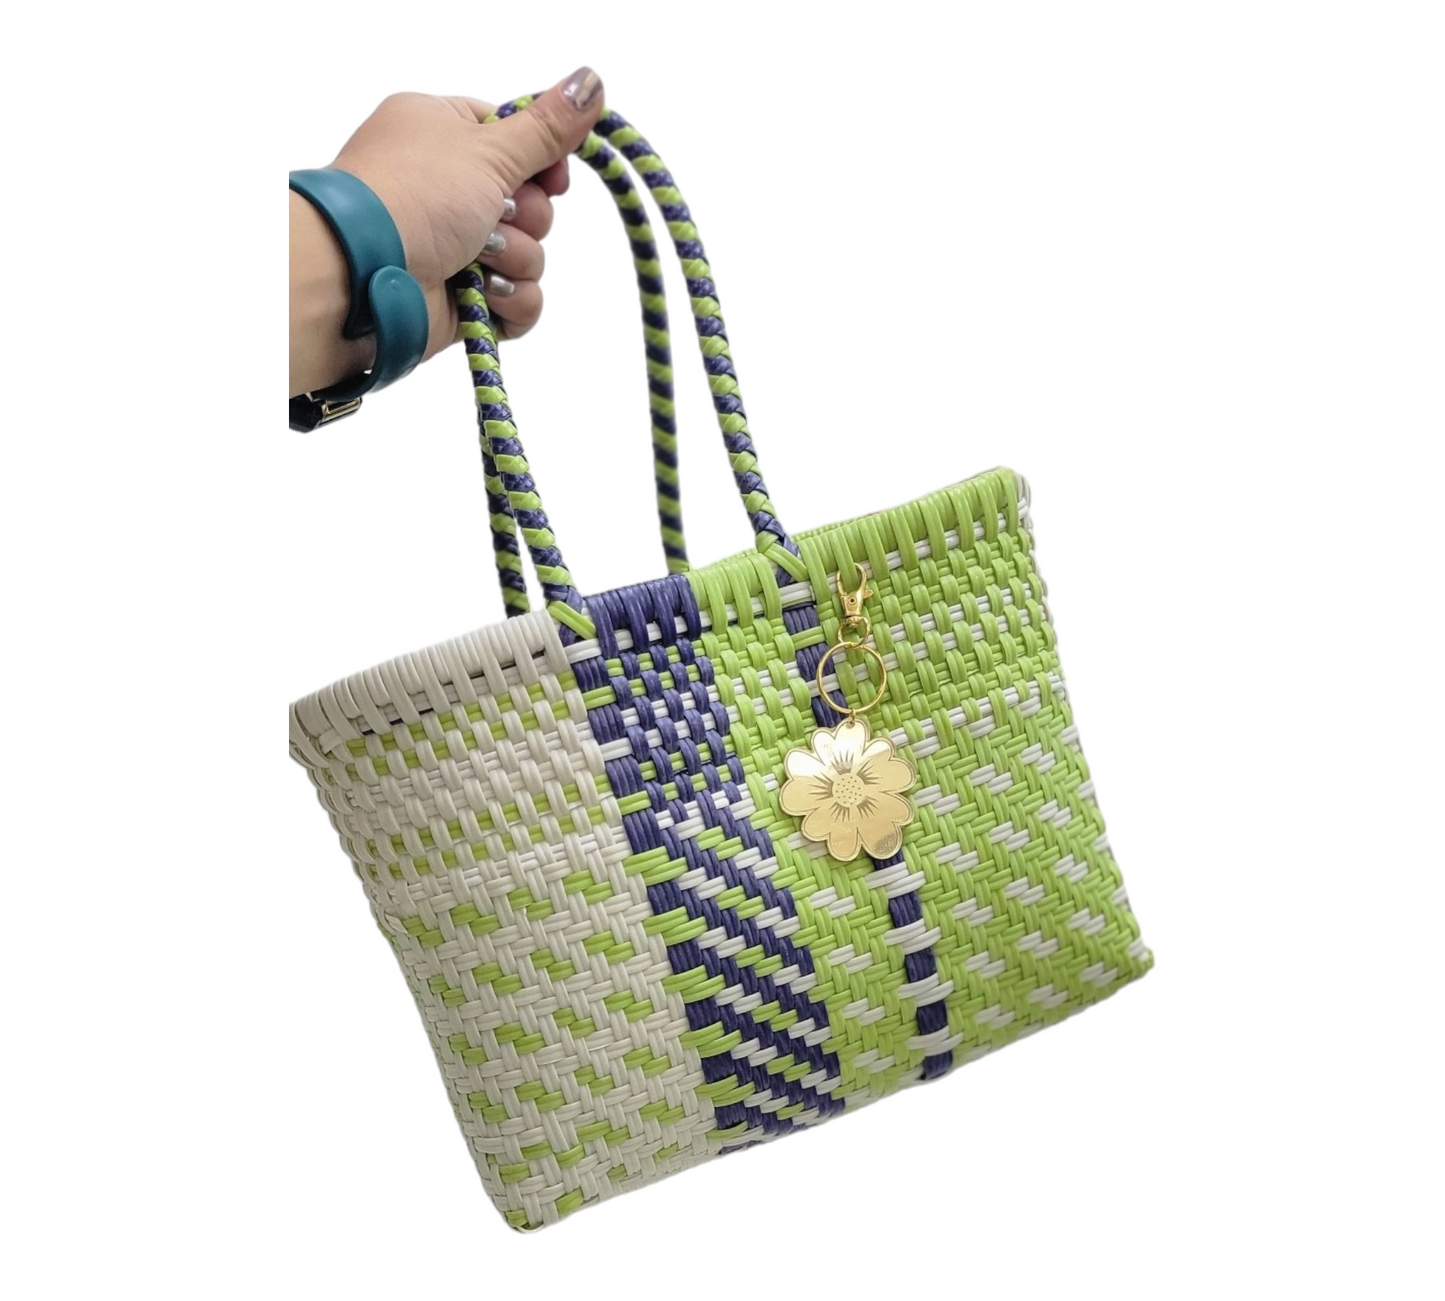 Lime Green Mini Tote | Handwoven recycled bags